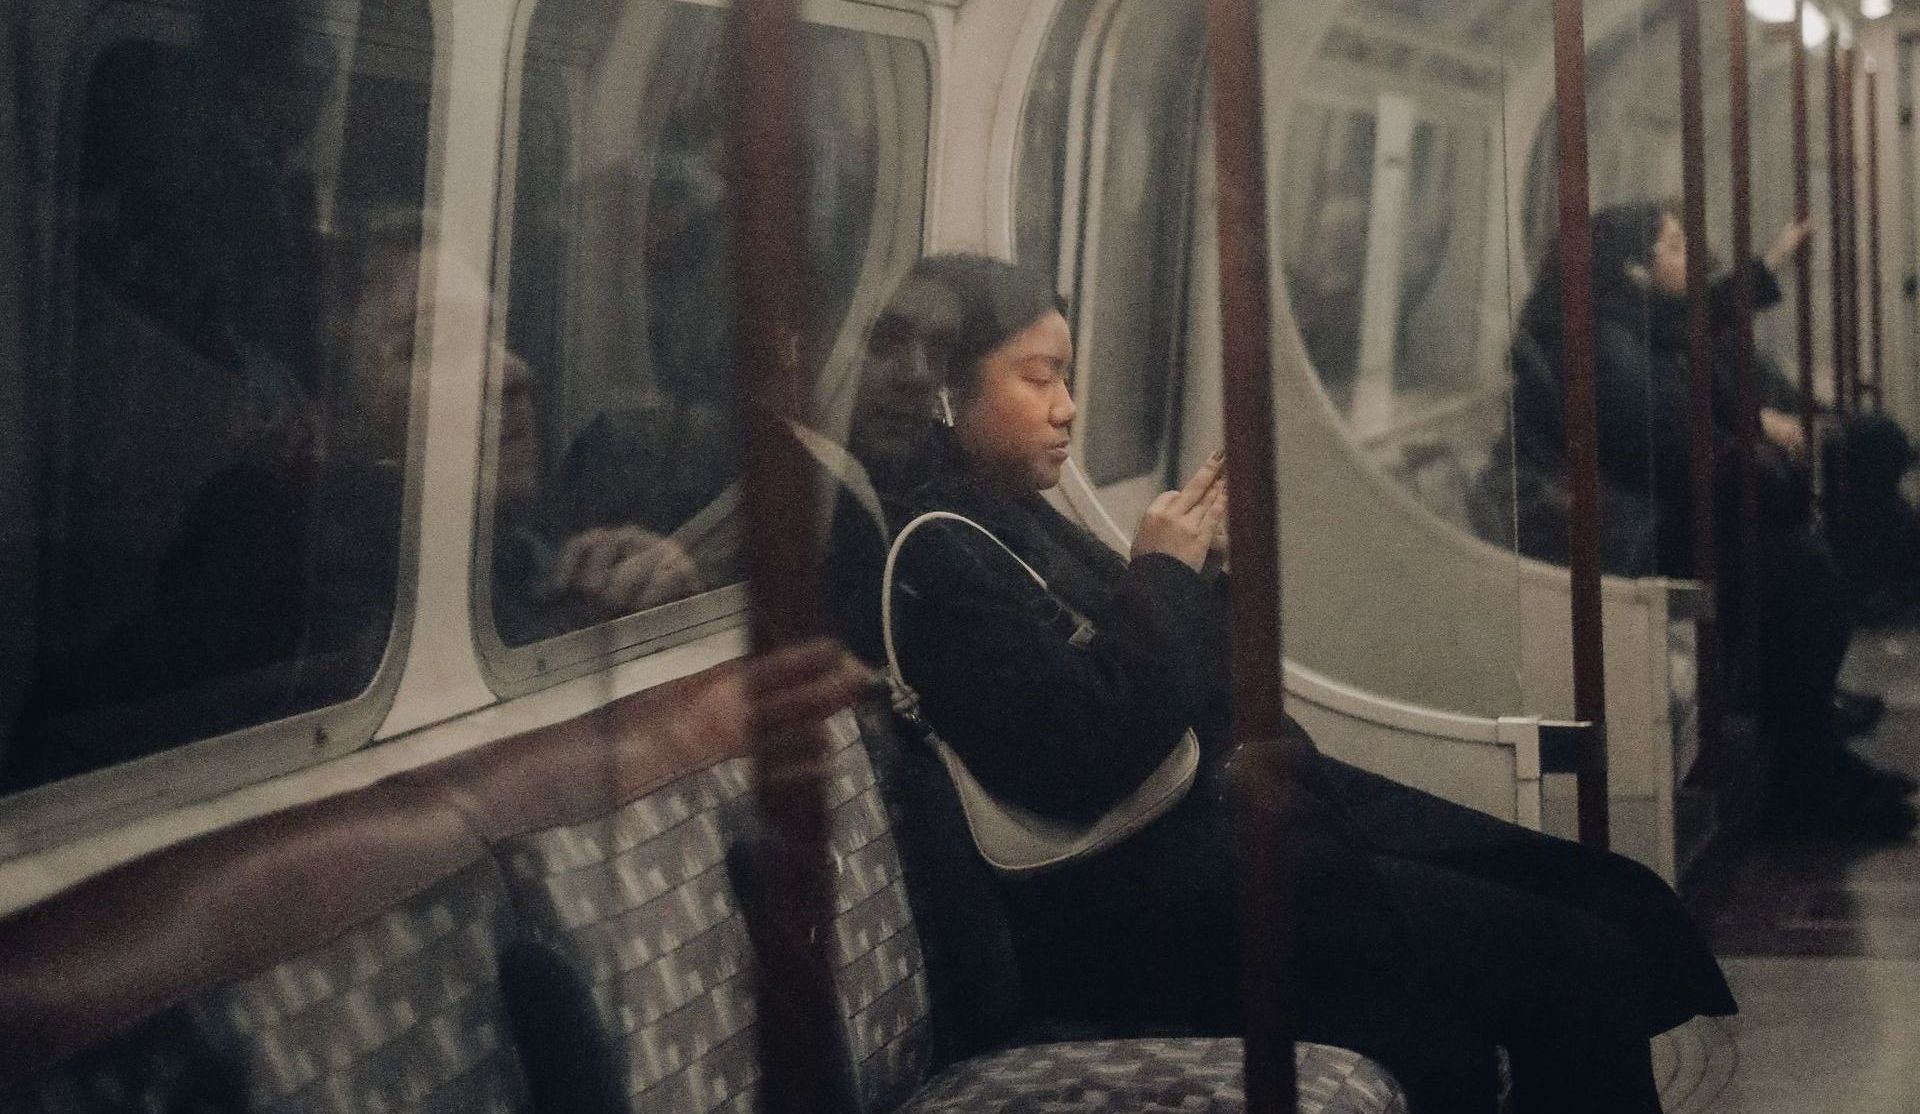 Girl sitting on a subway in New York City (NYC) on her phone processing